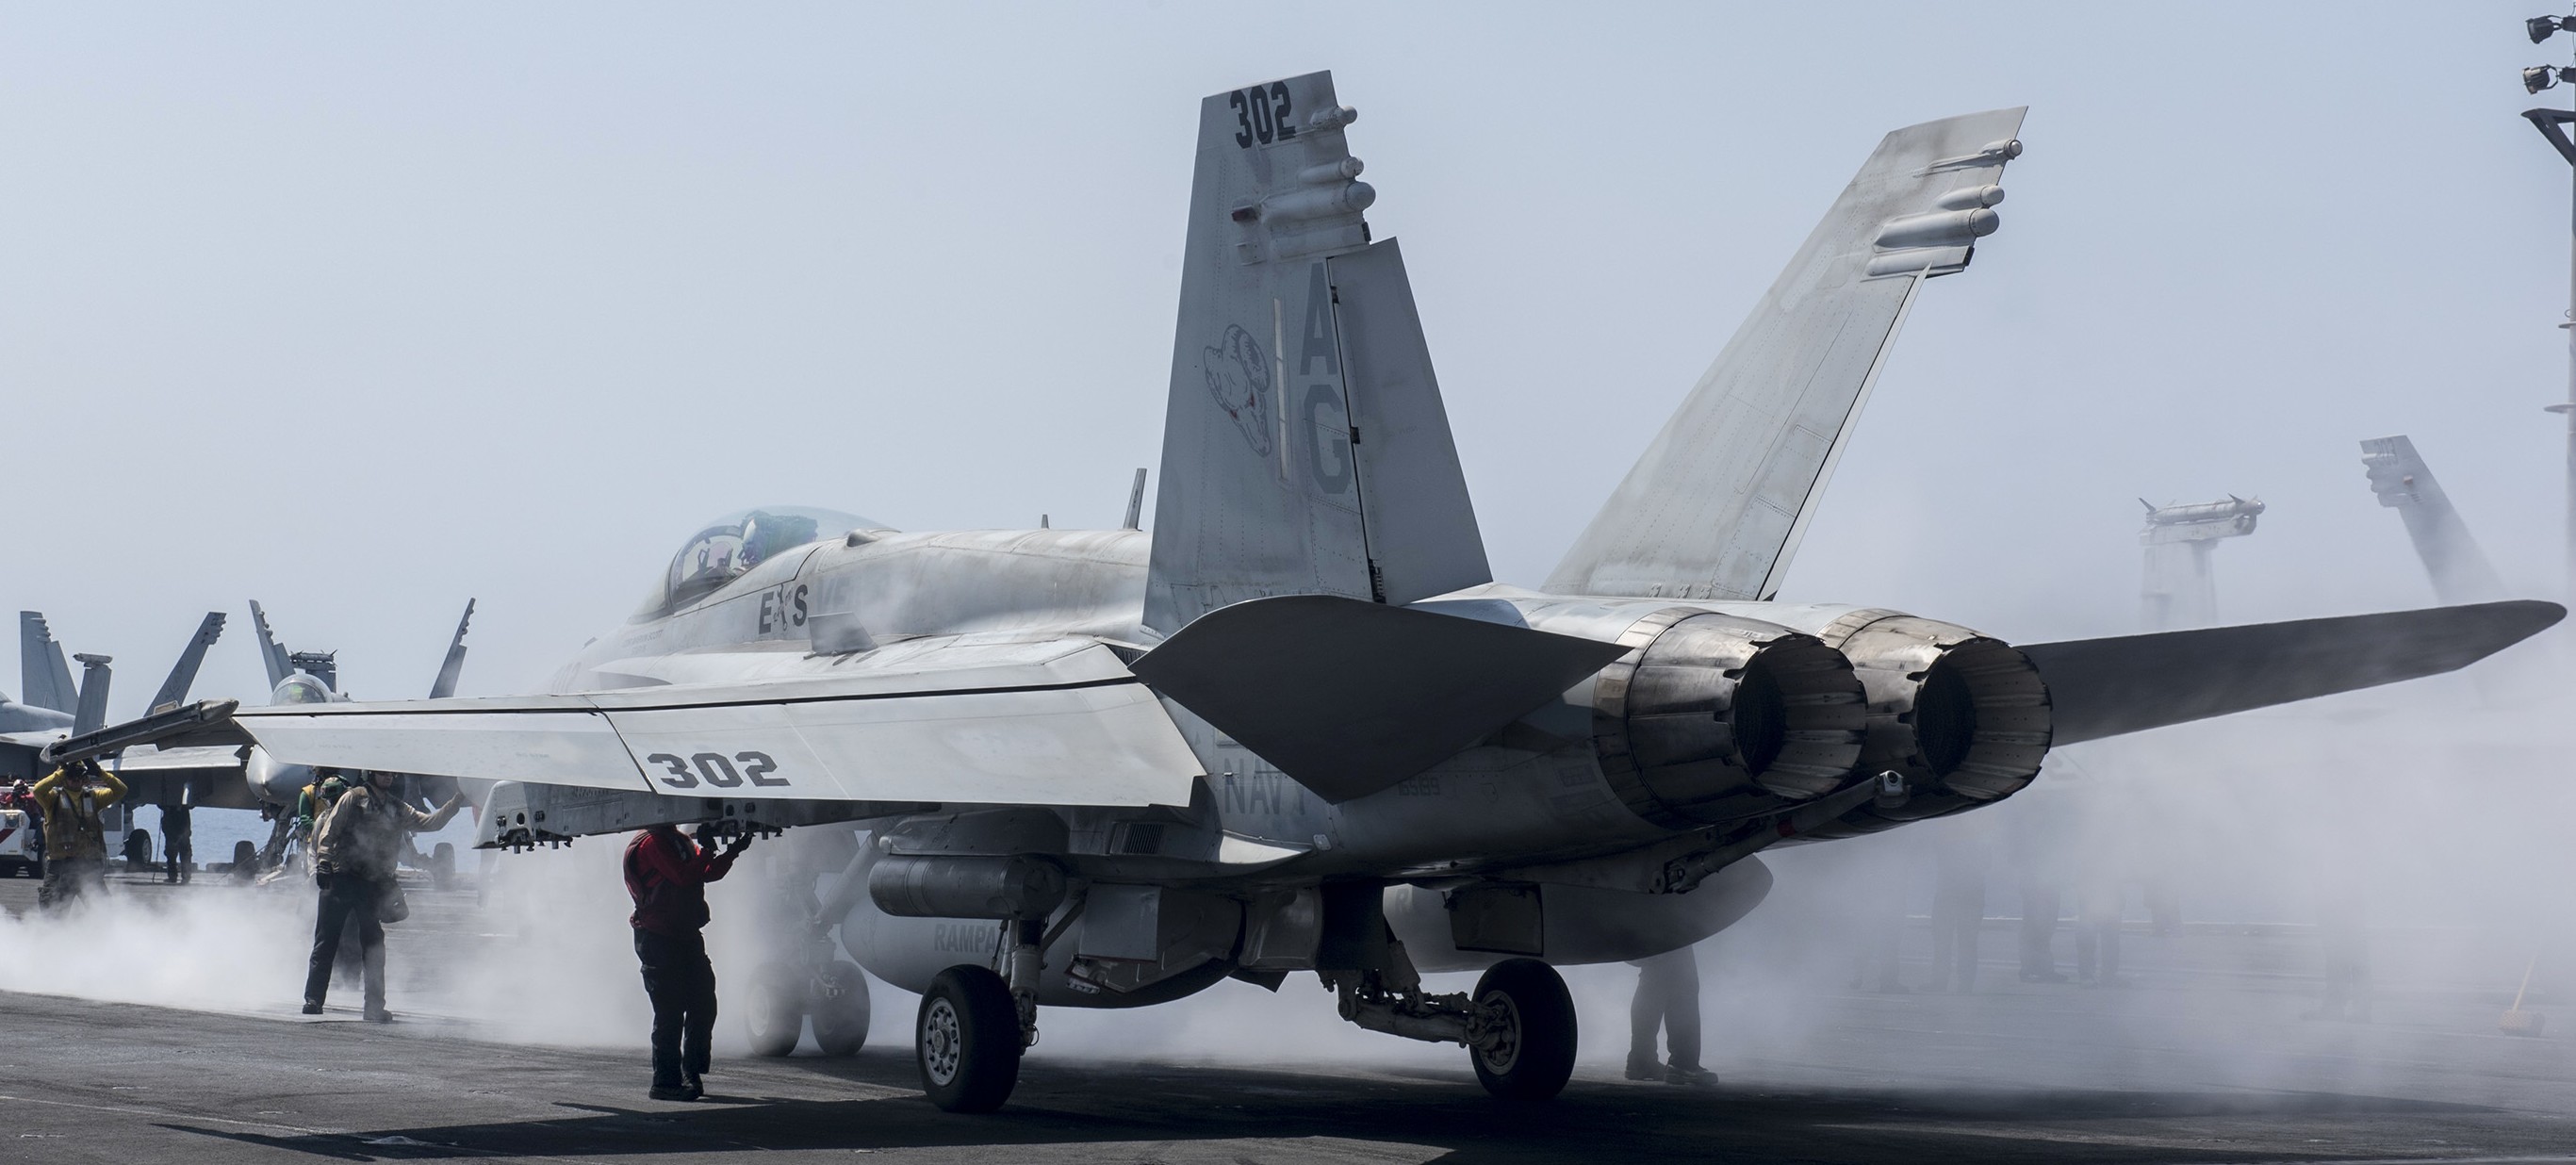 vfa-83 rampagers strike fighter squadron f/a-18c hornet cvw-7 uss harry s. truman cvn-75 40